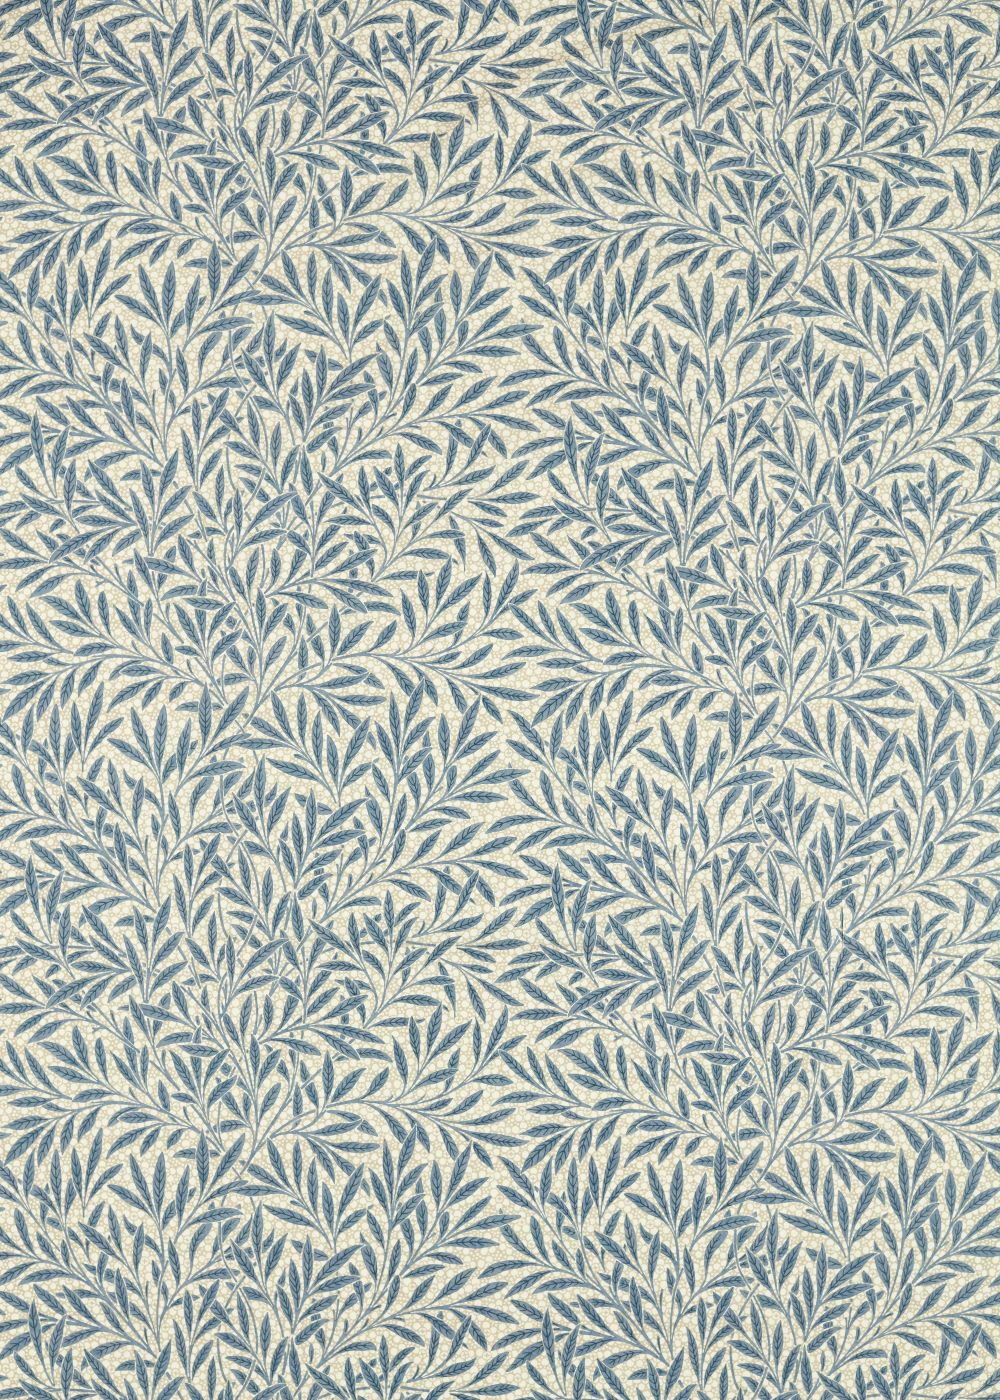 Emerys Willow Fabric - Woad Blue - by Morris